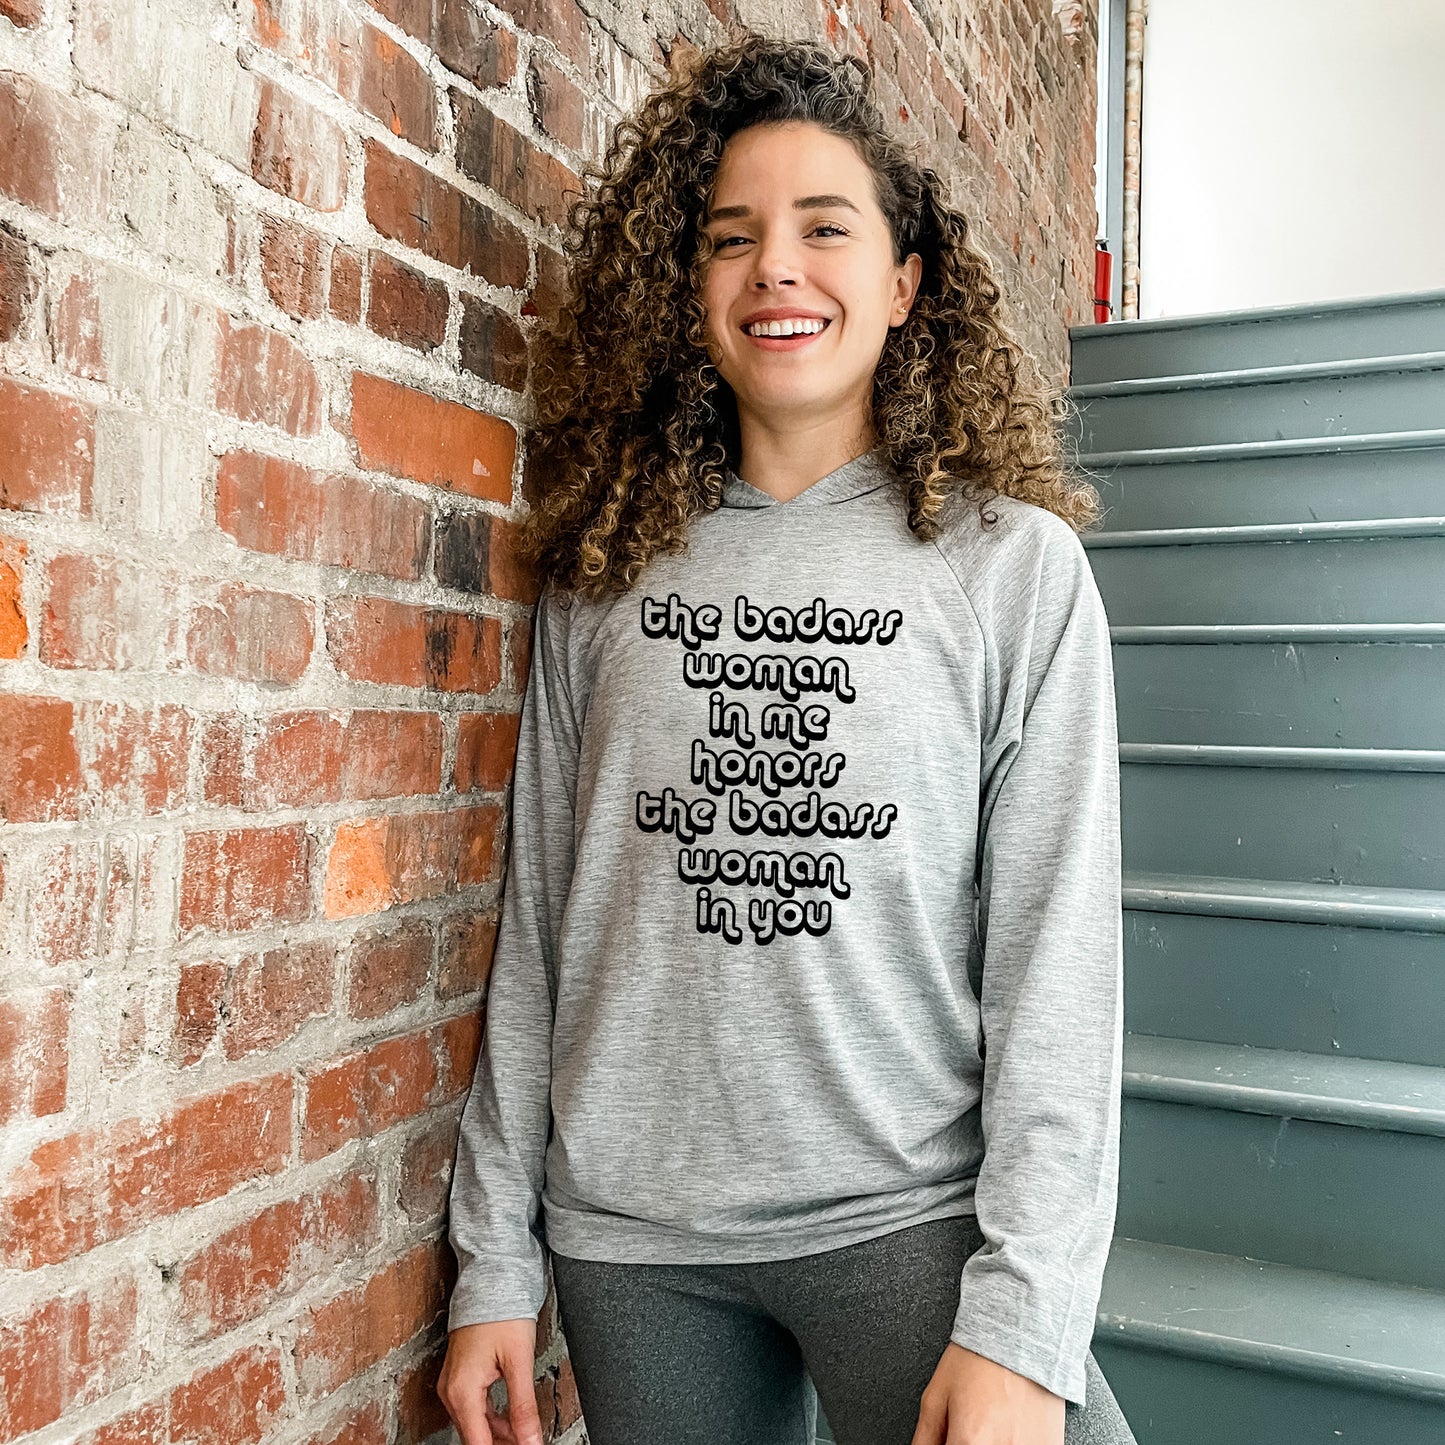 The Badass Woman in Me Honors the Badass Woman in You - Unisex T-Shirt Hoodie - Heather Gray